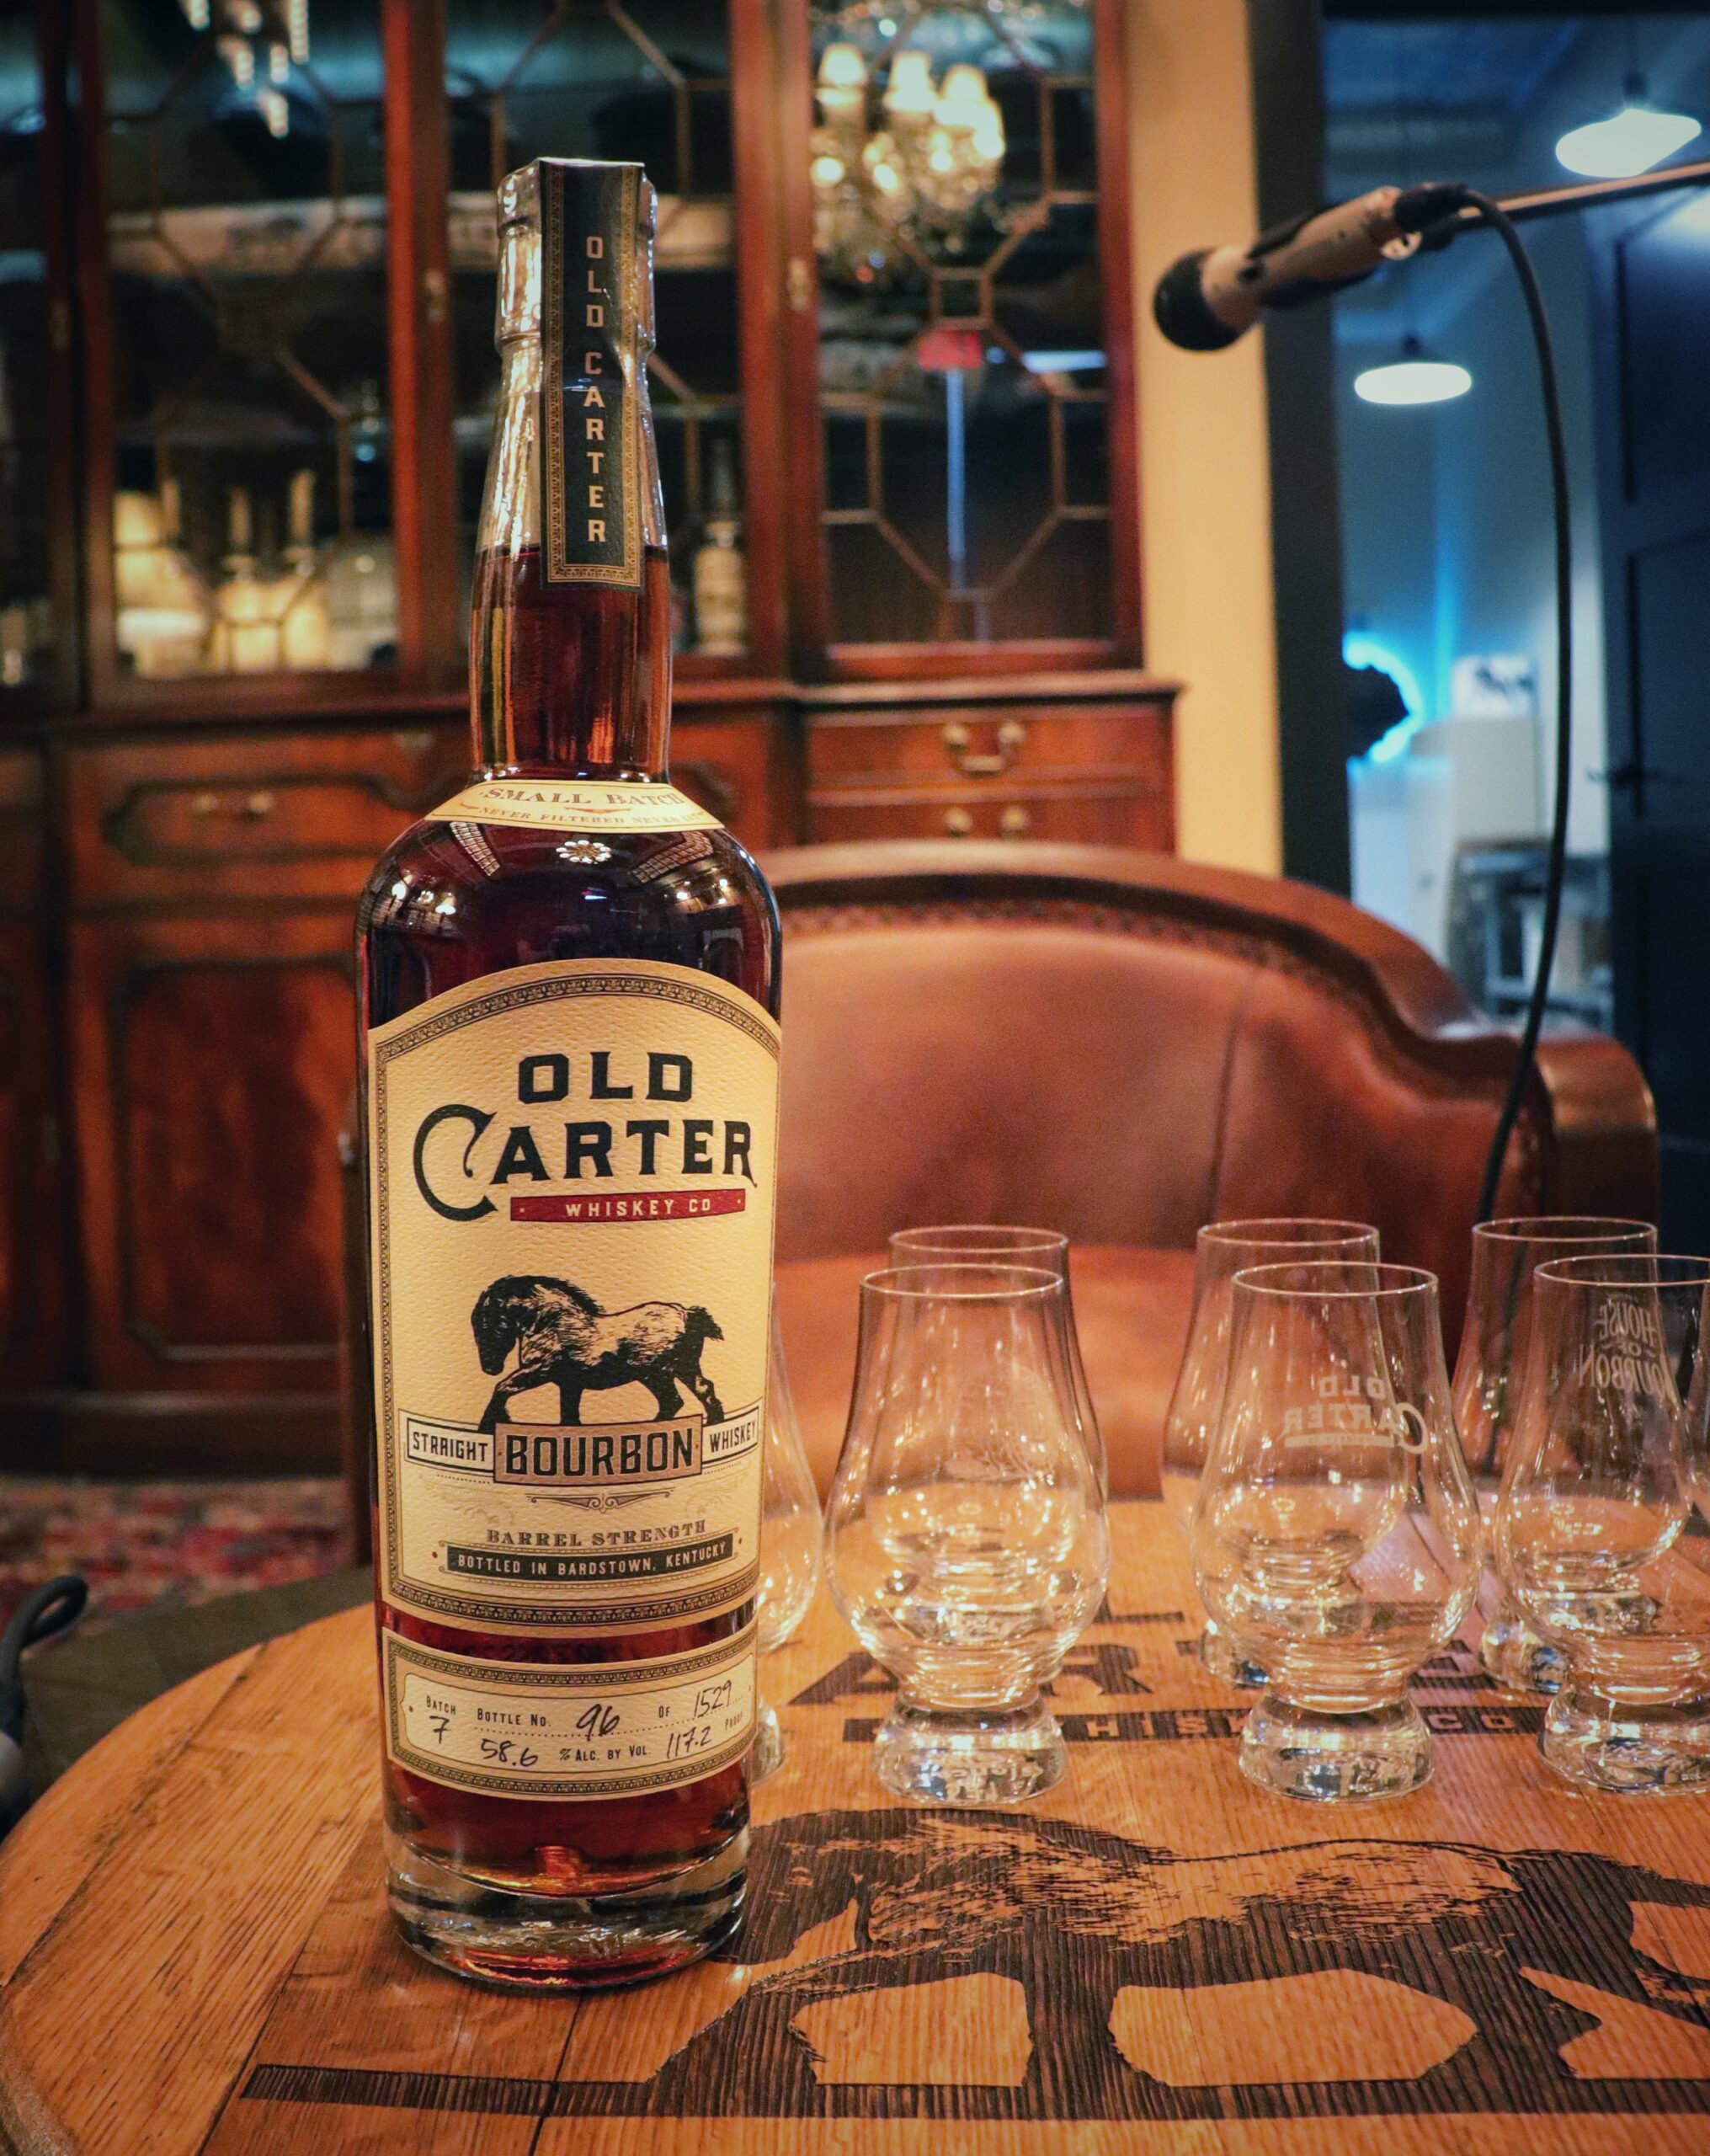 Old Carter 12 Year American Whiskey Batch 2, 1579 bottles produced, barrel strength 139.2 proof; Released in October 2019, Kentucky